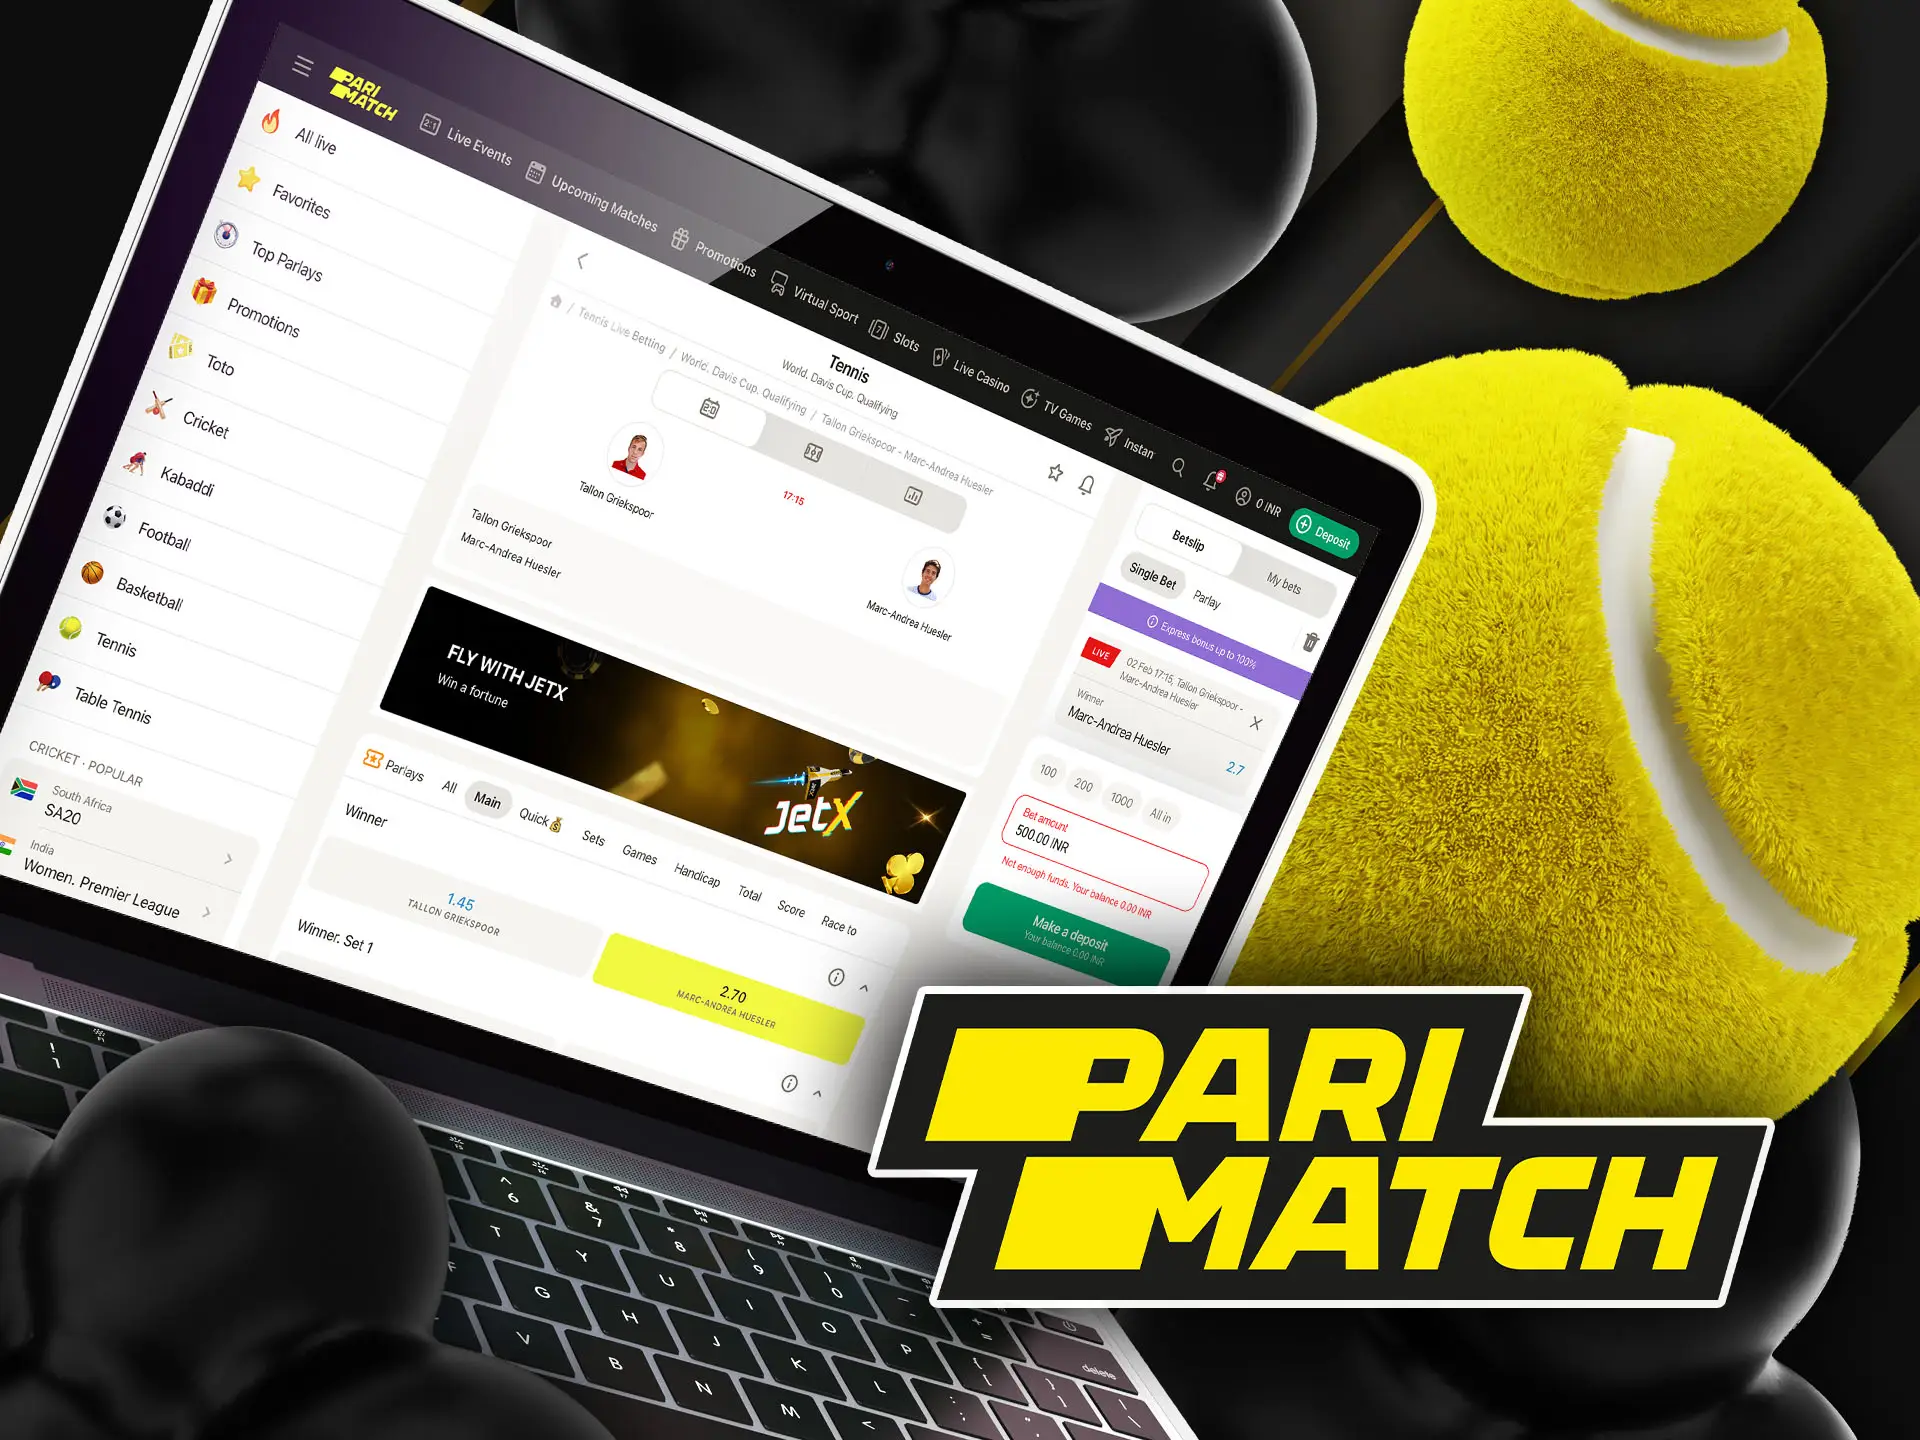 Tennis betting at Parimatch for India.